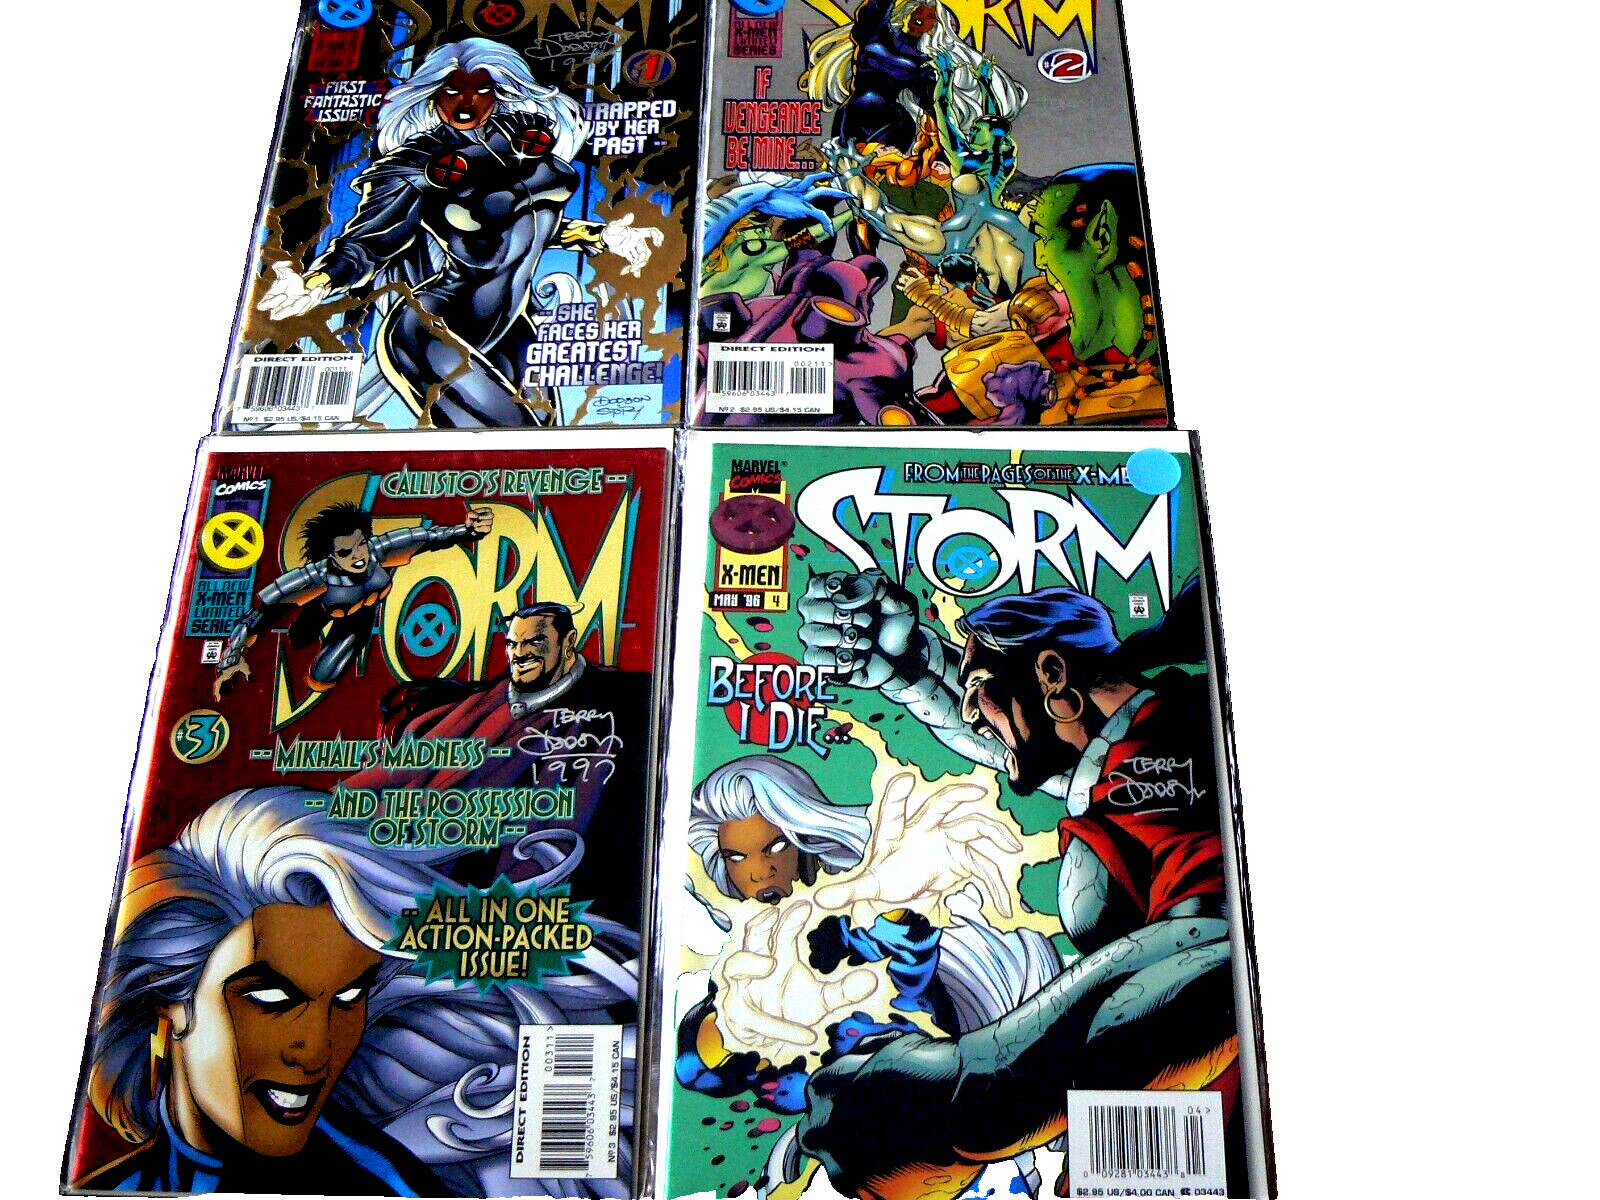 STORM vol 1, #1,2,3,4 Signed by Artist Dodson, Bagged & Boarded, 